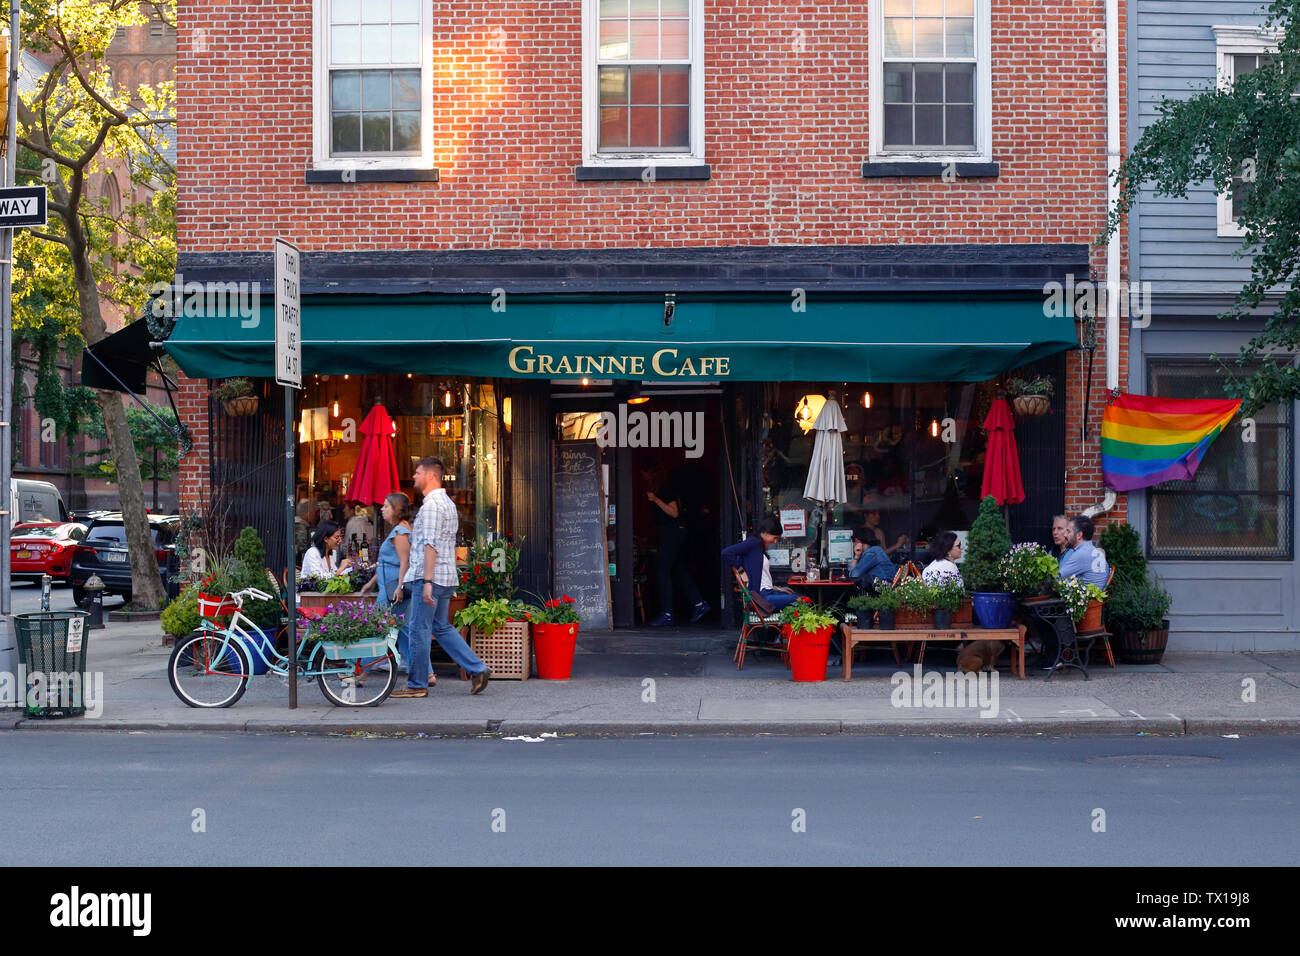 Le Grainne Cafe, 183 Ninth Ave, New York, NY. exterior storefront of a restaurant, and sidewalk cafe in the Chelsea neighborhood of Manhattan. Stock Photo